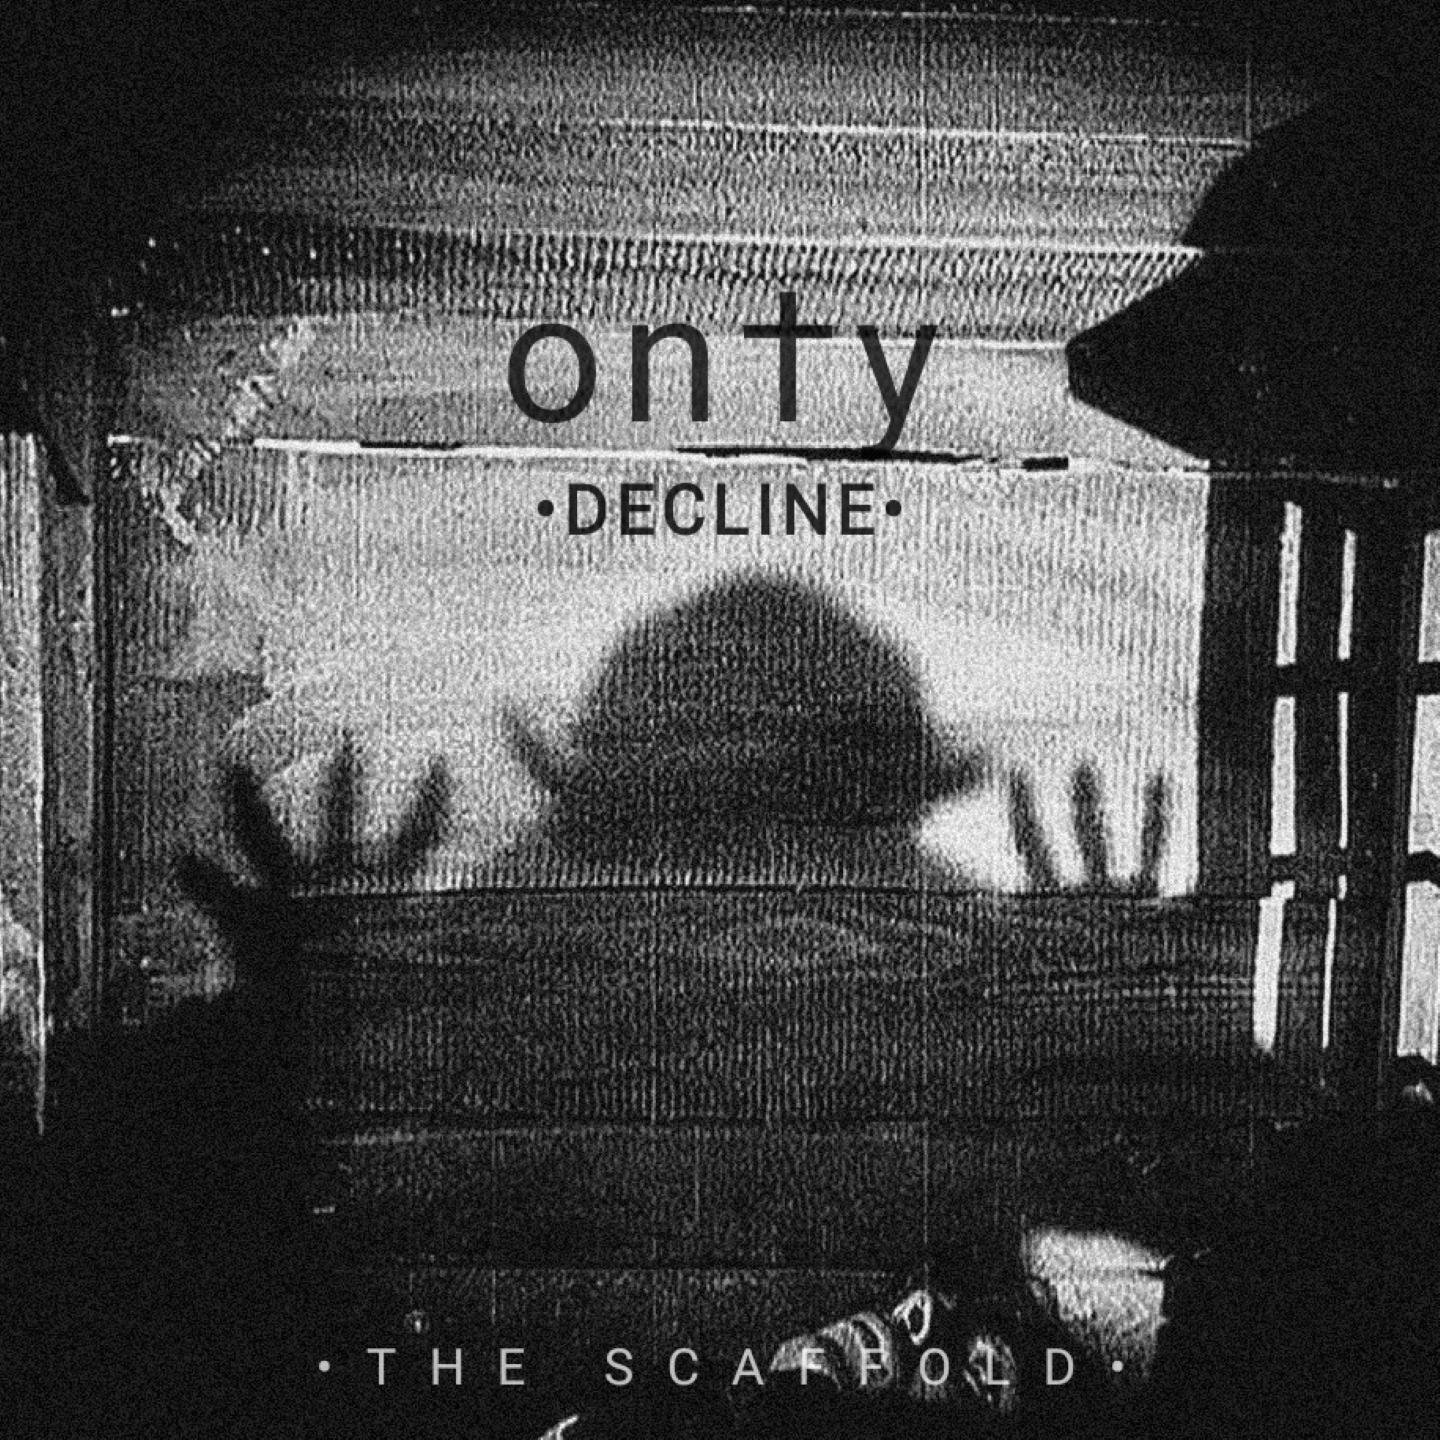 The Scaffold - only decline